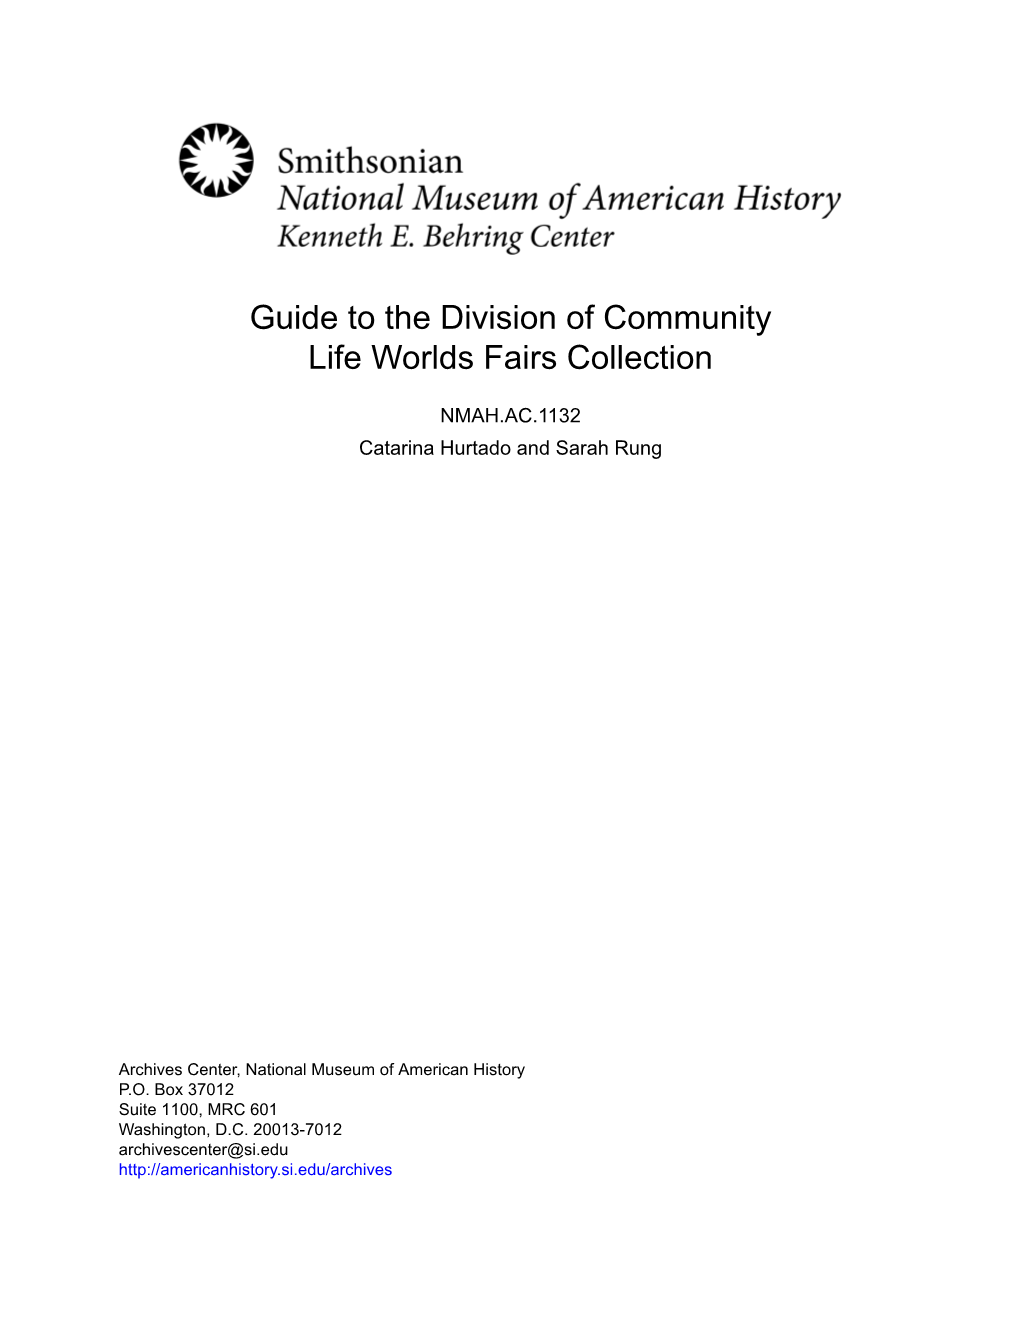 Guide to the Division of Community Life Worlds Fairs Collection